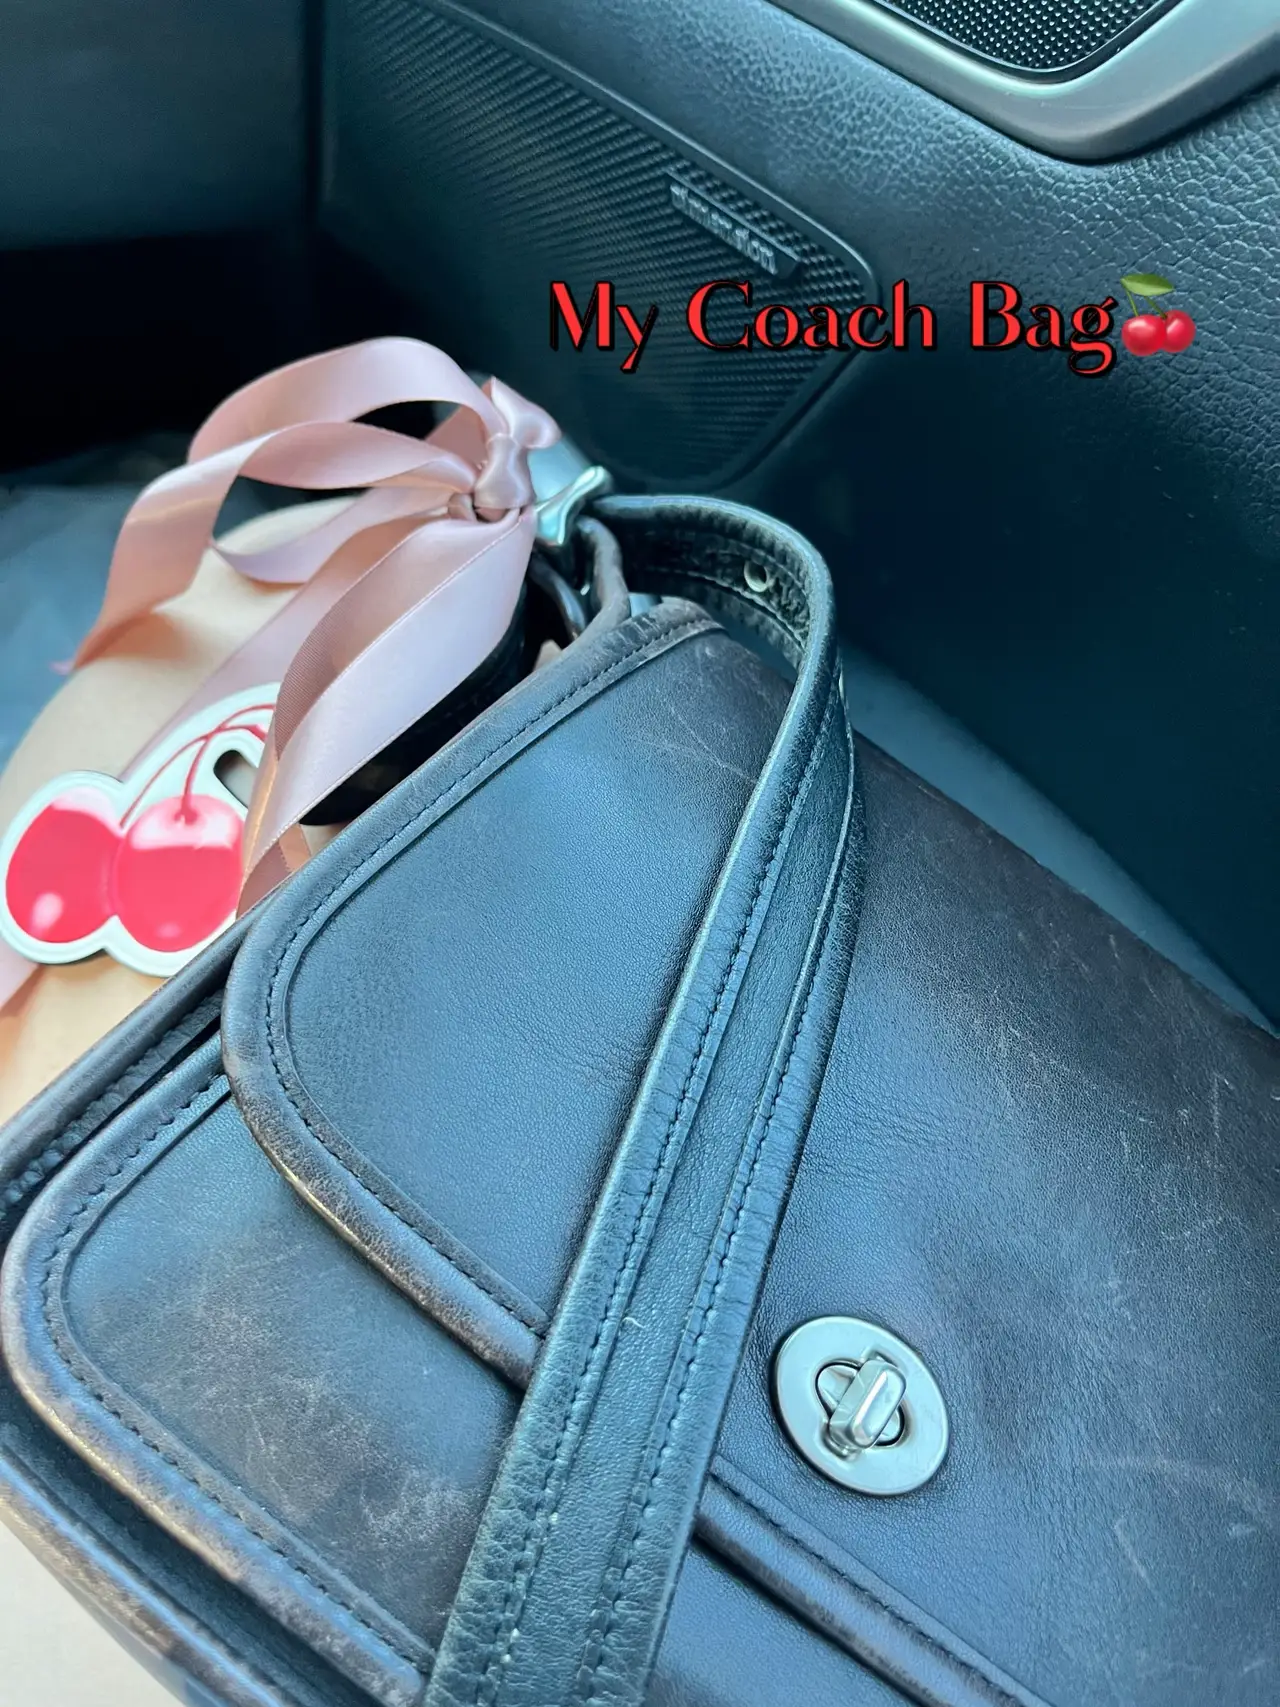 Coach Cassie Crossbody What's In My Bag & 1 Month Review 